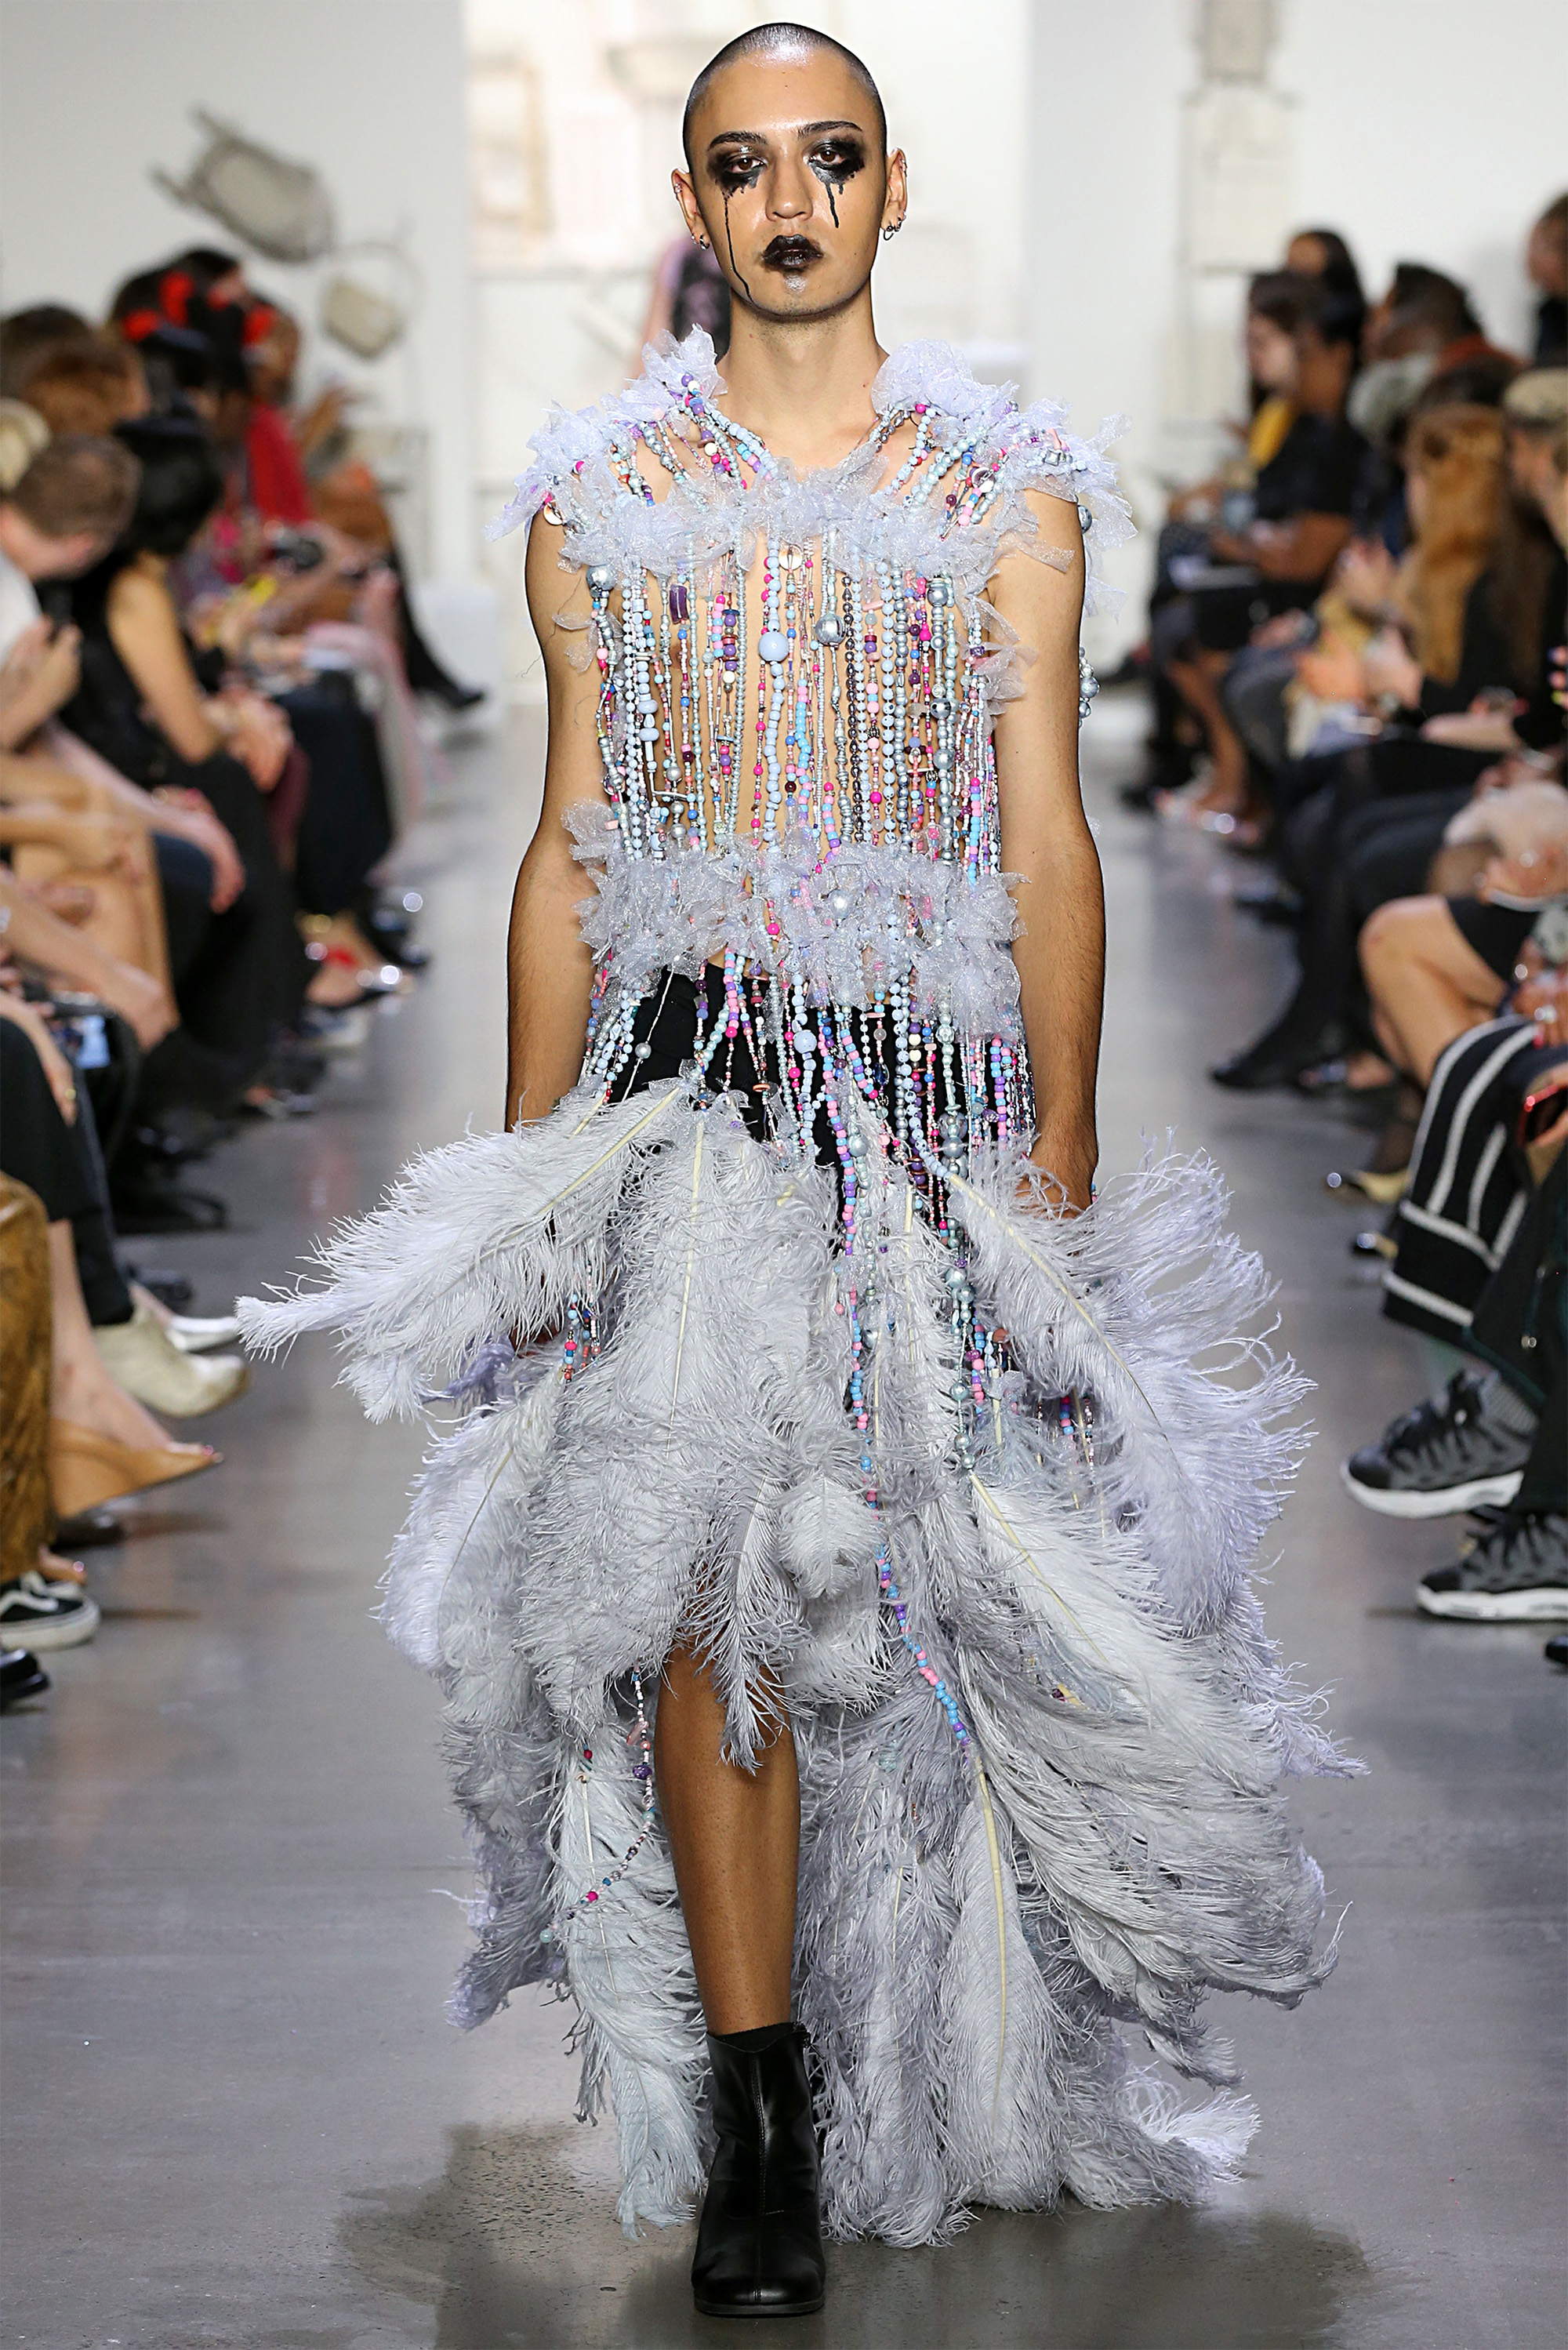 Model on runway wearing a beaded and feathered piece by Persephone Bennett 18 AP